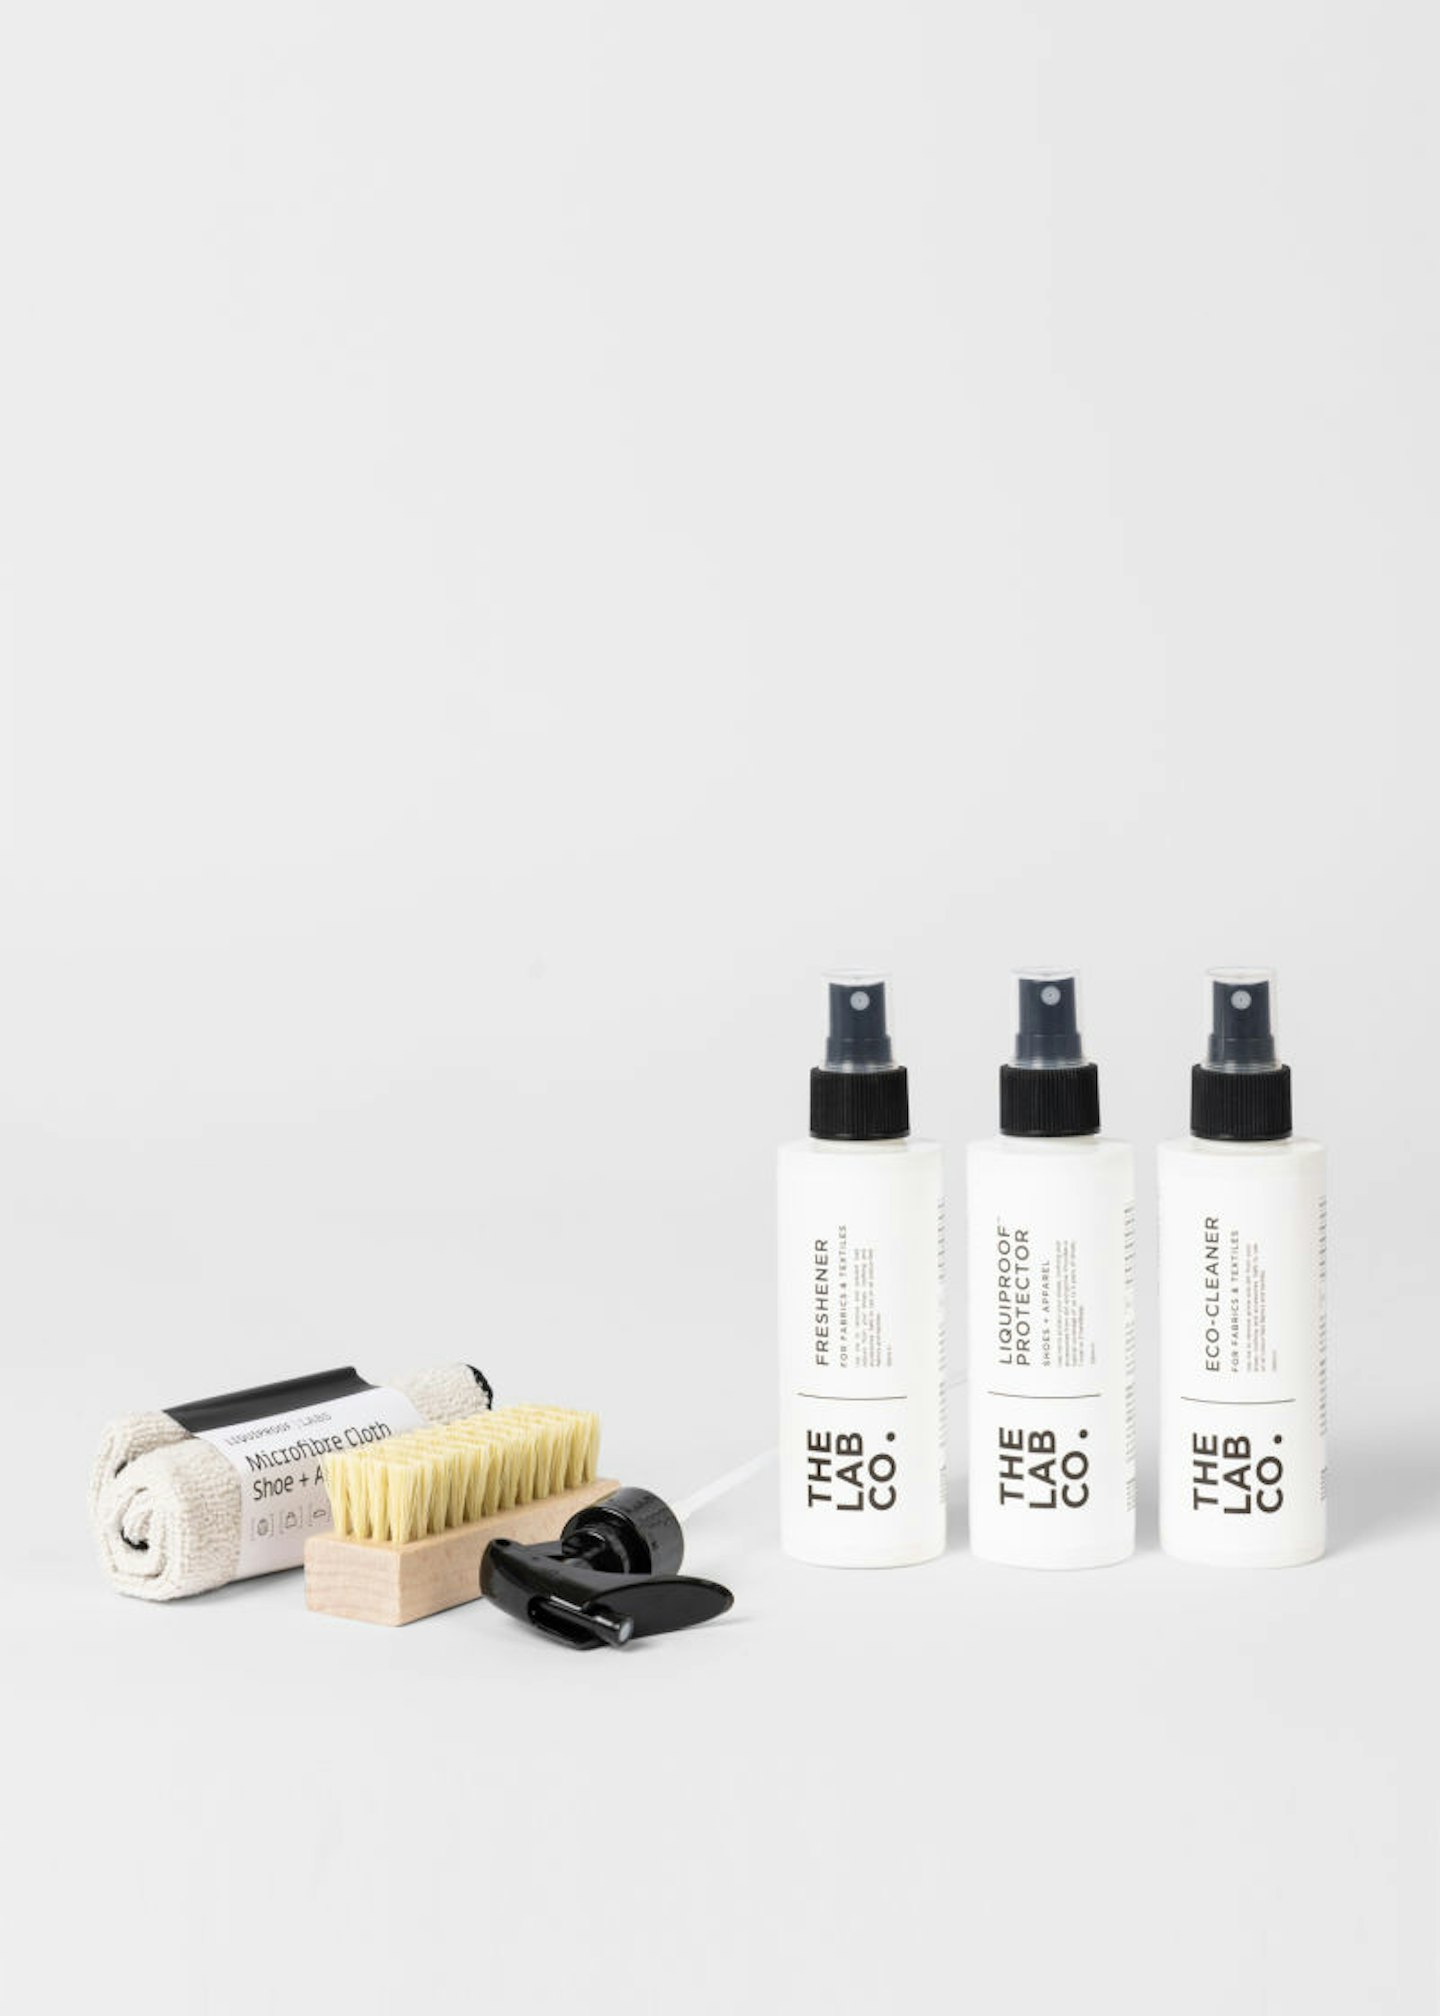 The Lab Co, Footwear Care Kit